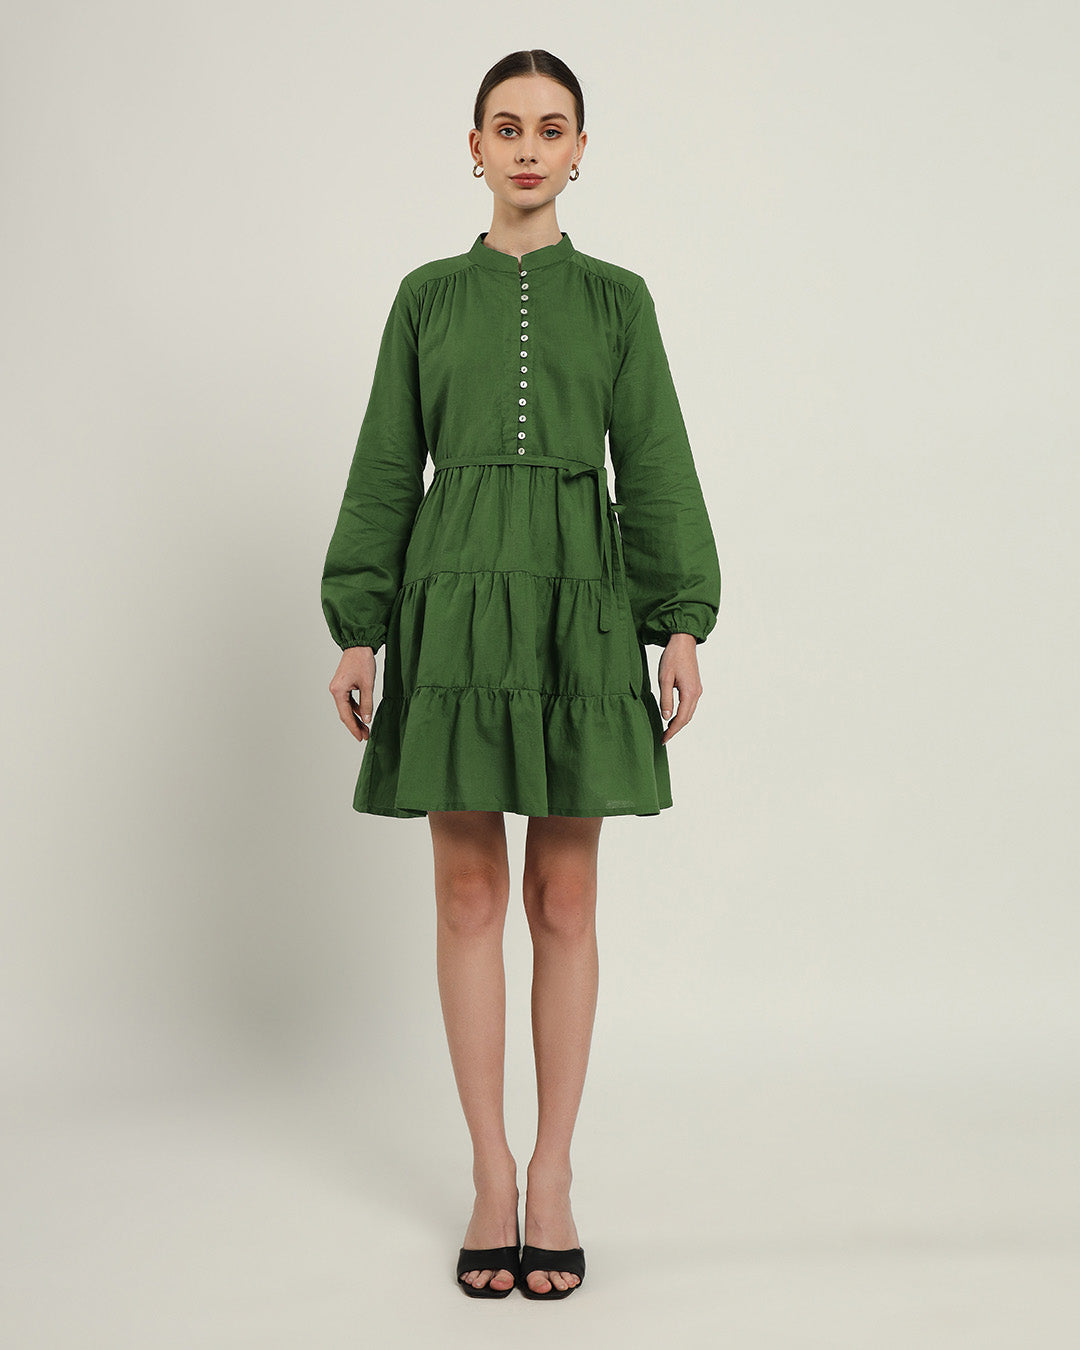 The Ely Emerald Cotton Dress